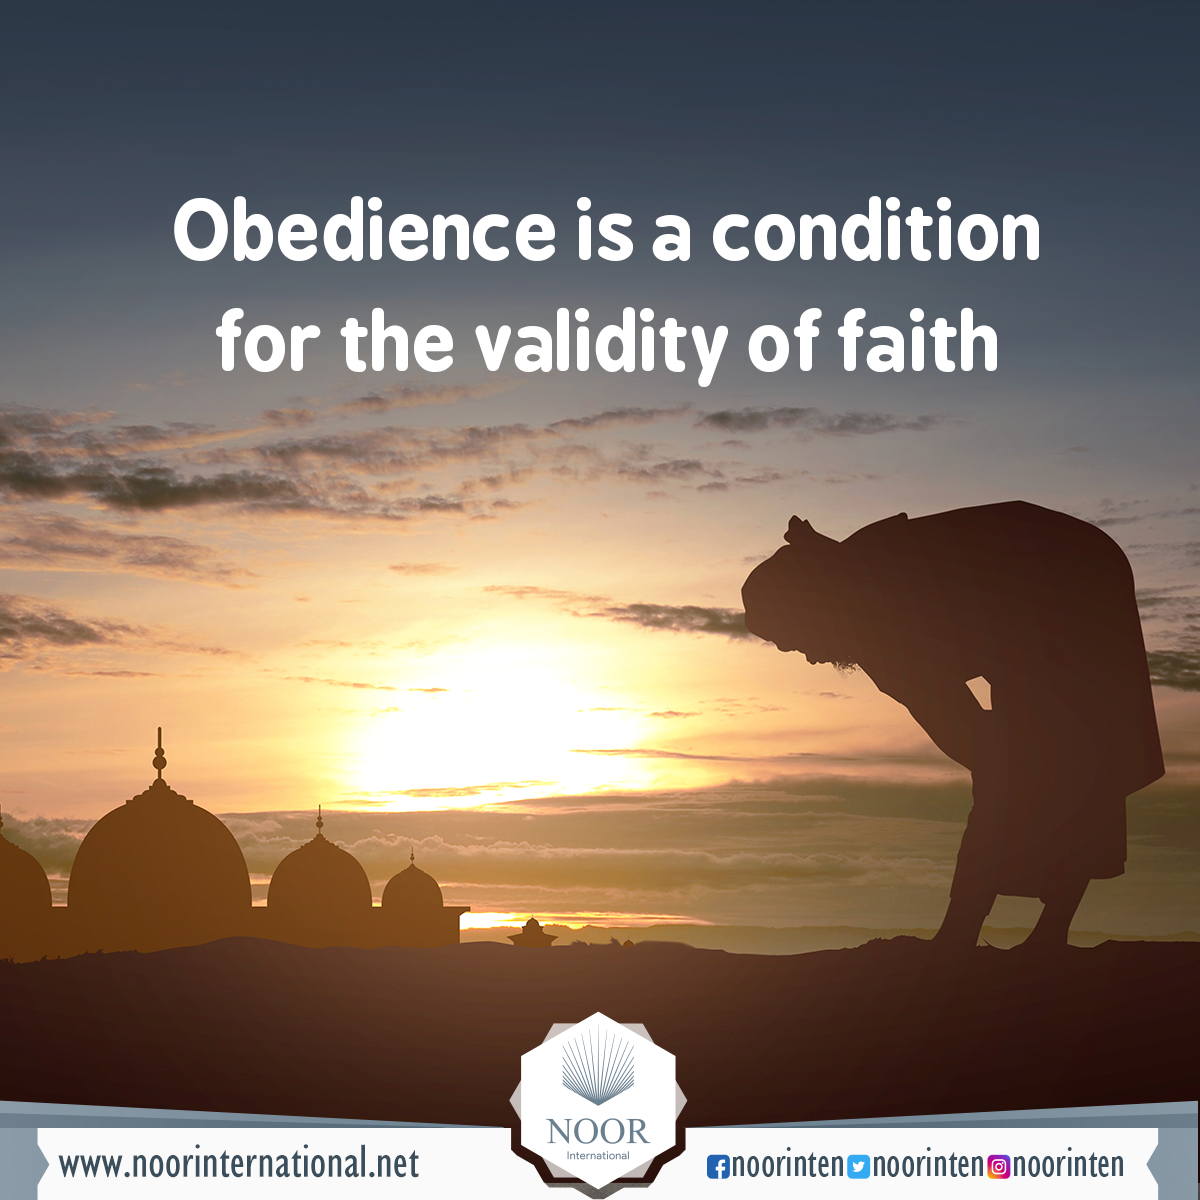 Obedience is a condition for the validity of faith